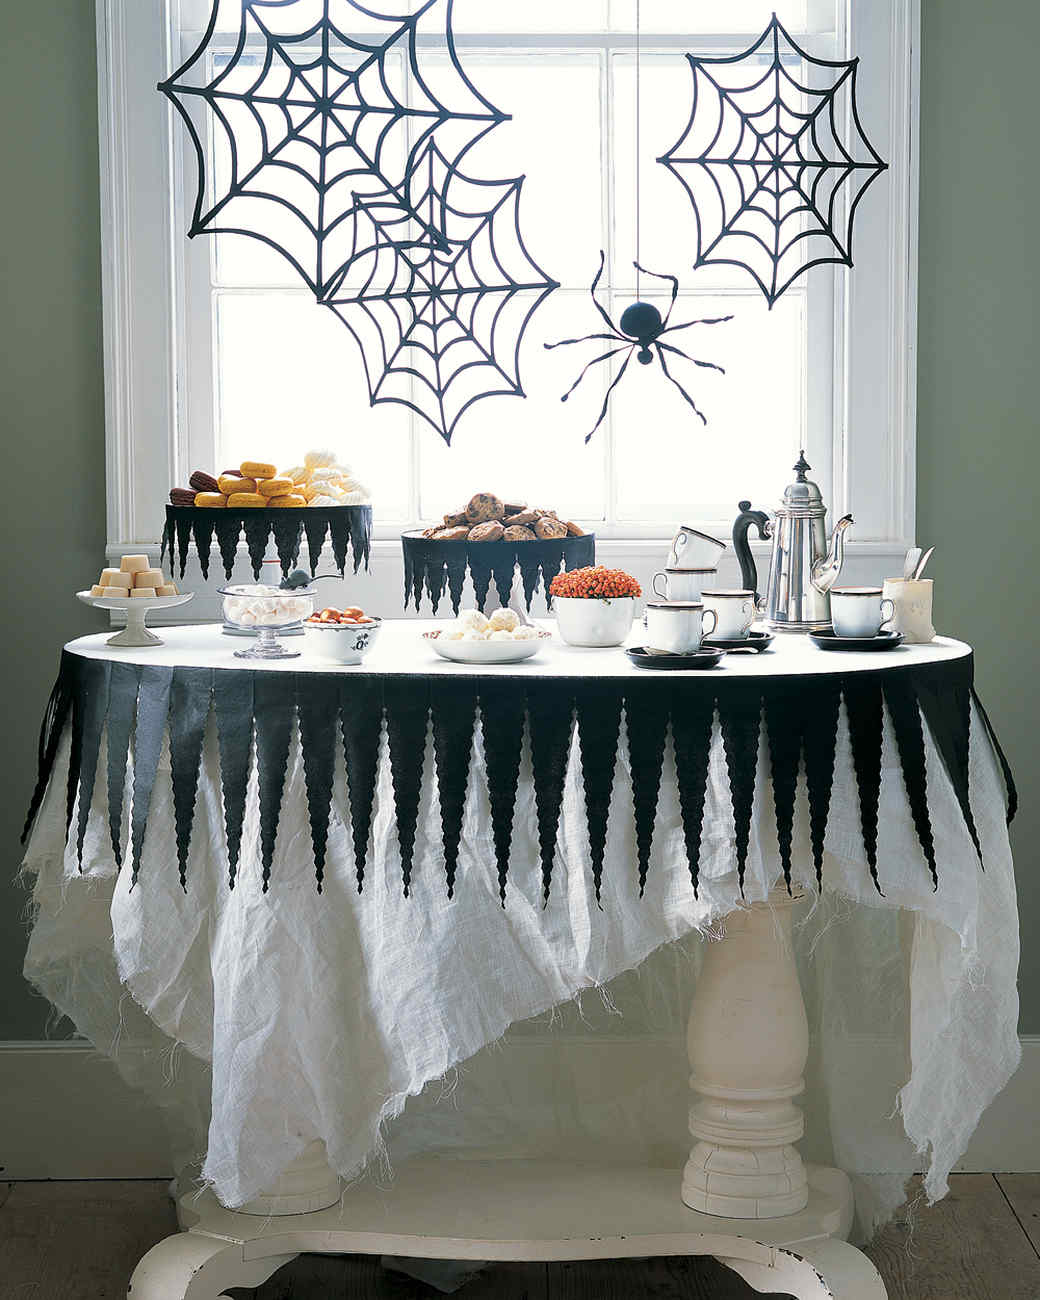 Halloween Decorations Indoor - Photos All Recommendation